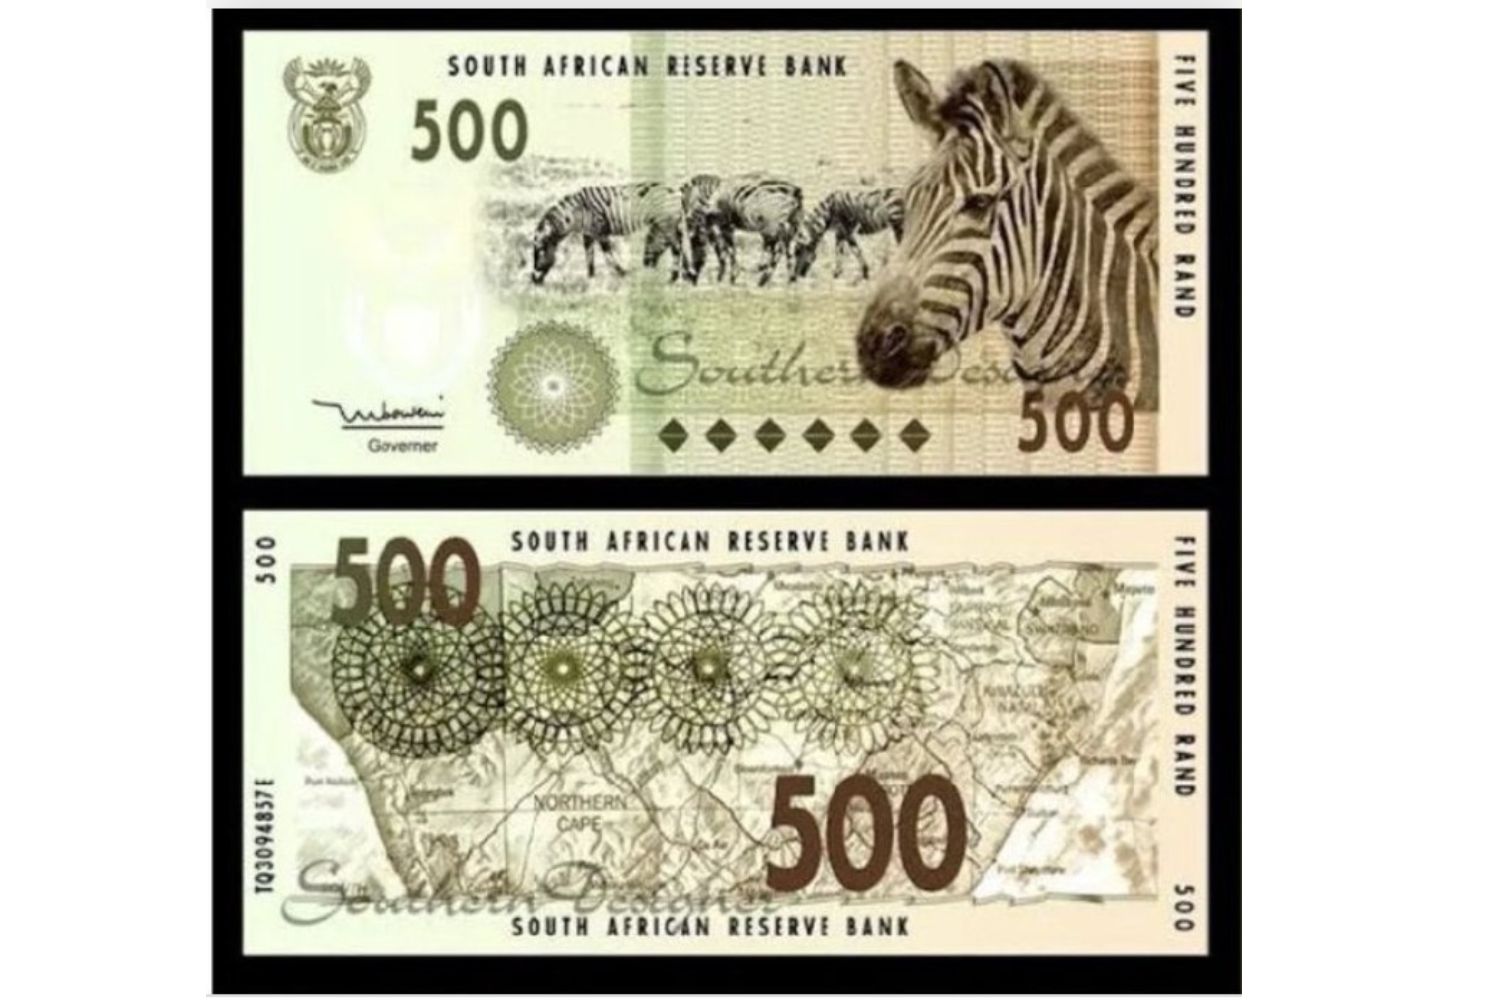 South Africa not getting new R500 bank note & R10 coin | The Citizen